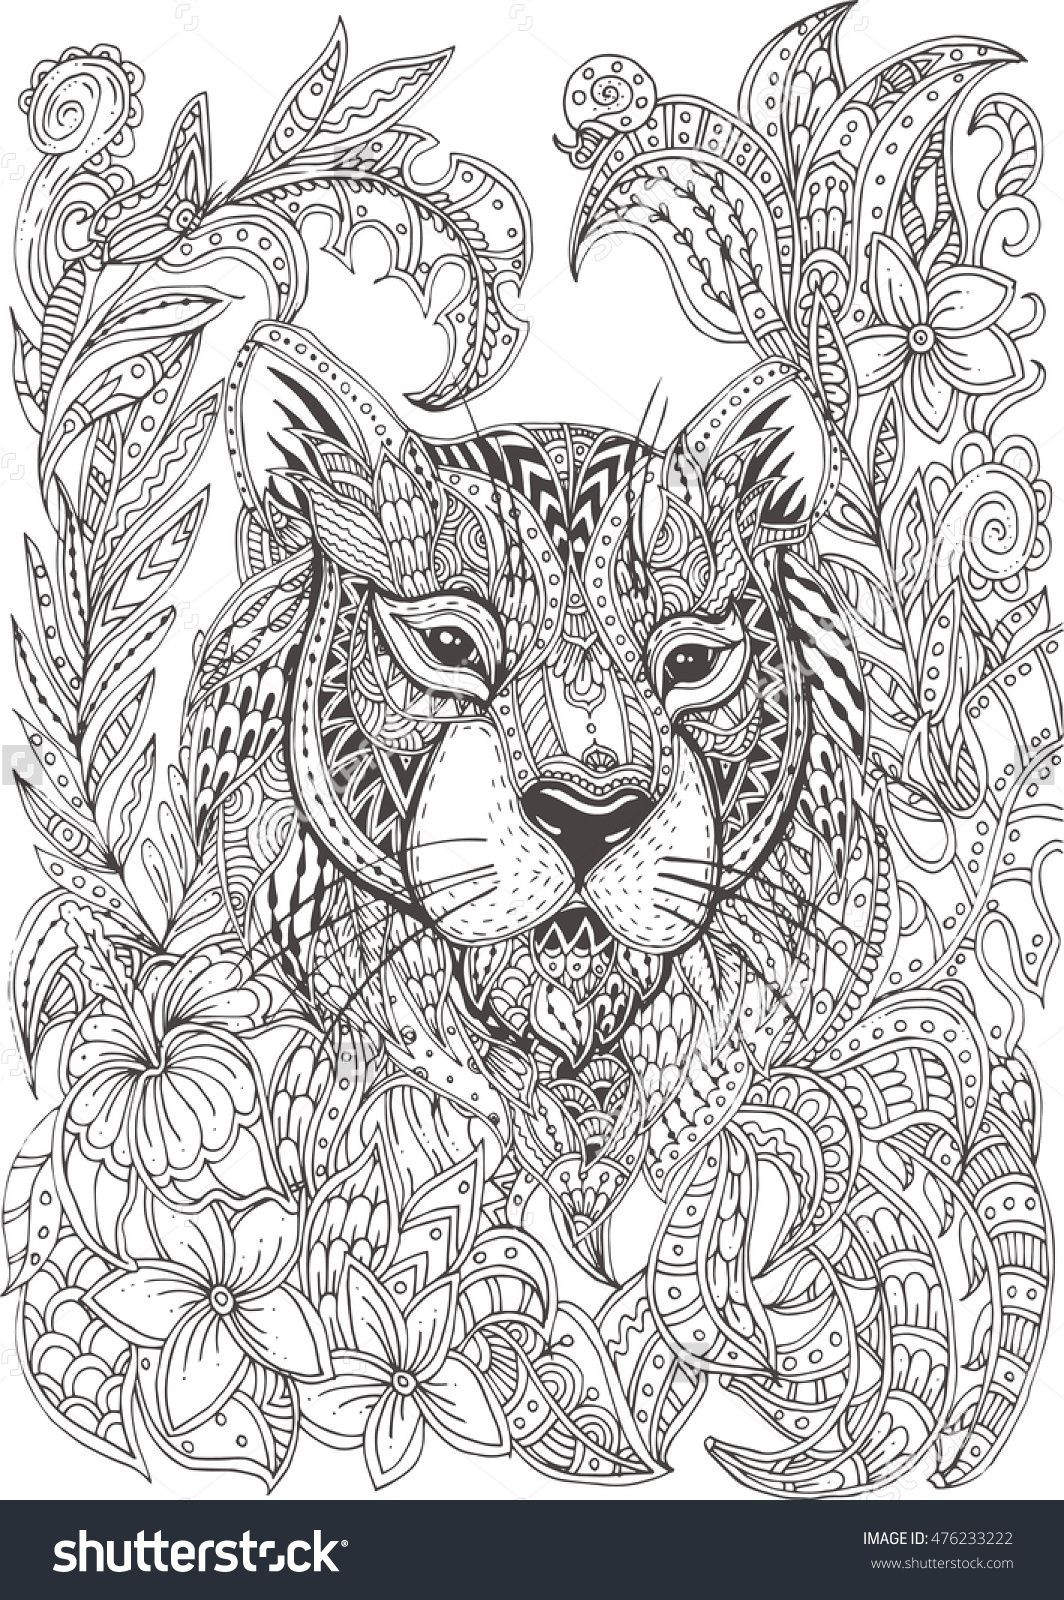 Adult Coloring Pages Animal Patterns
 Hand drawn tiger with ethnic floral doodle pattern